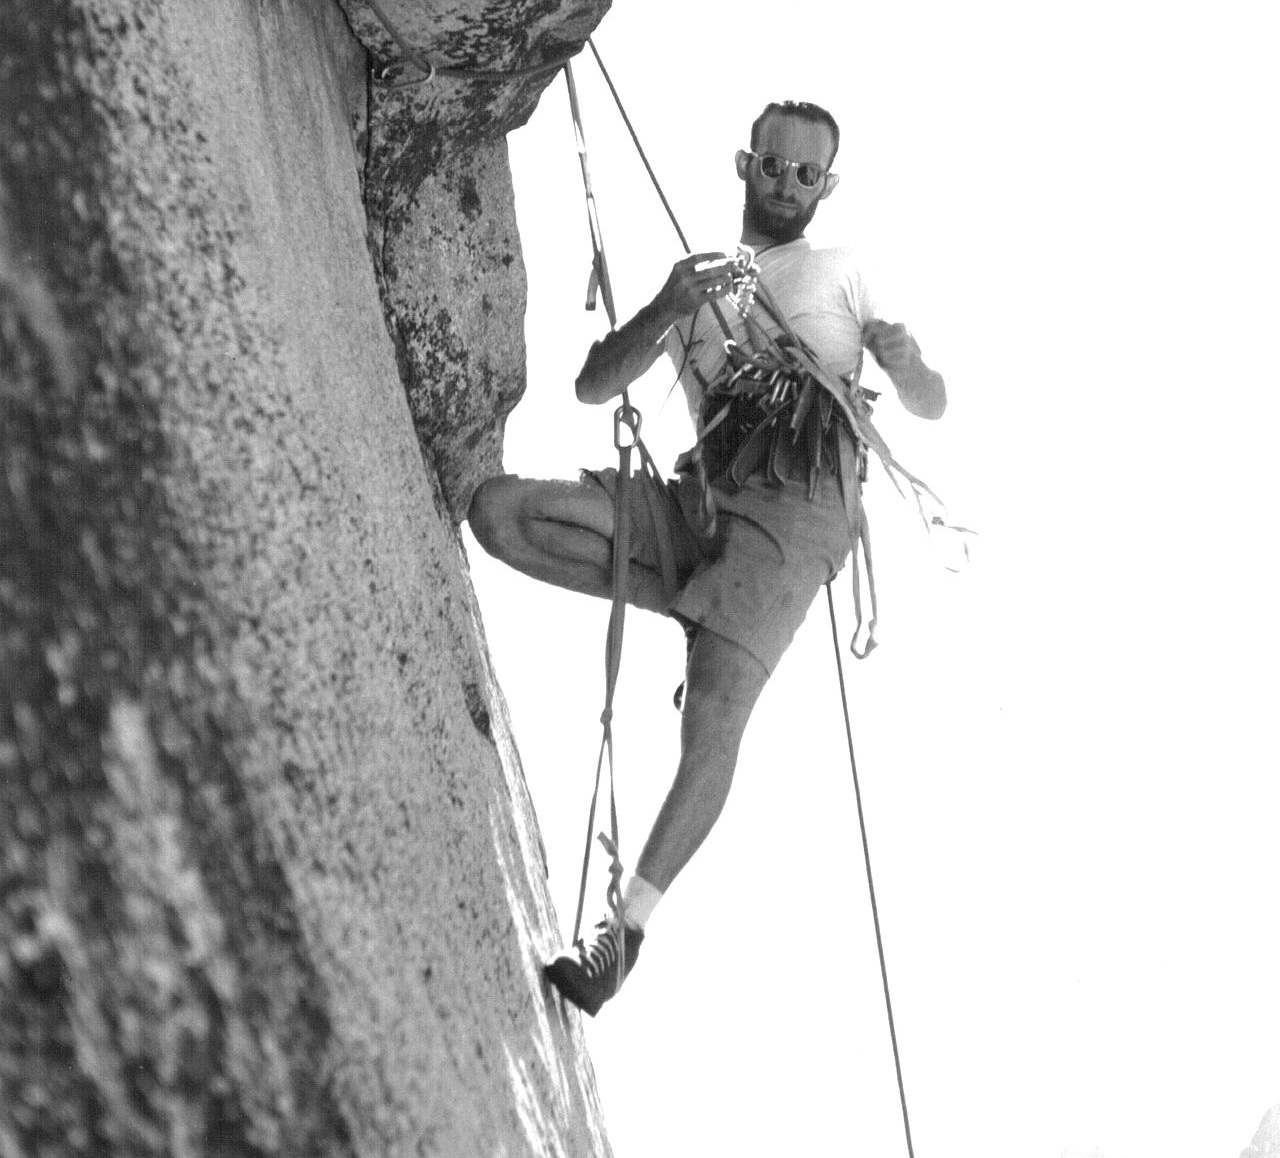 If there is one climber who defines the legacy of Yosemite climbing more than any other, it is Royal Robbins. Yosemite, California, USA